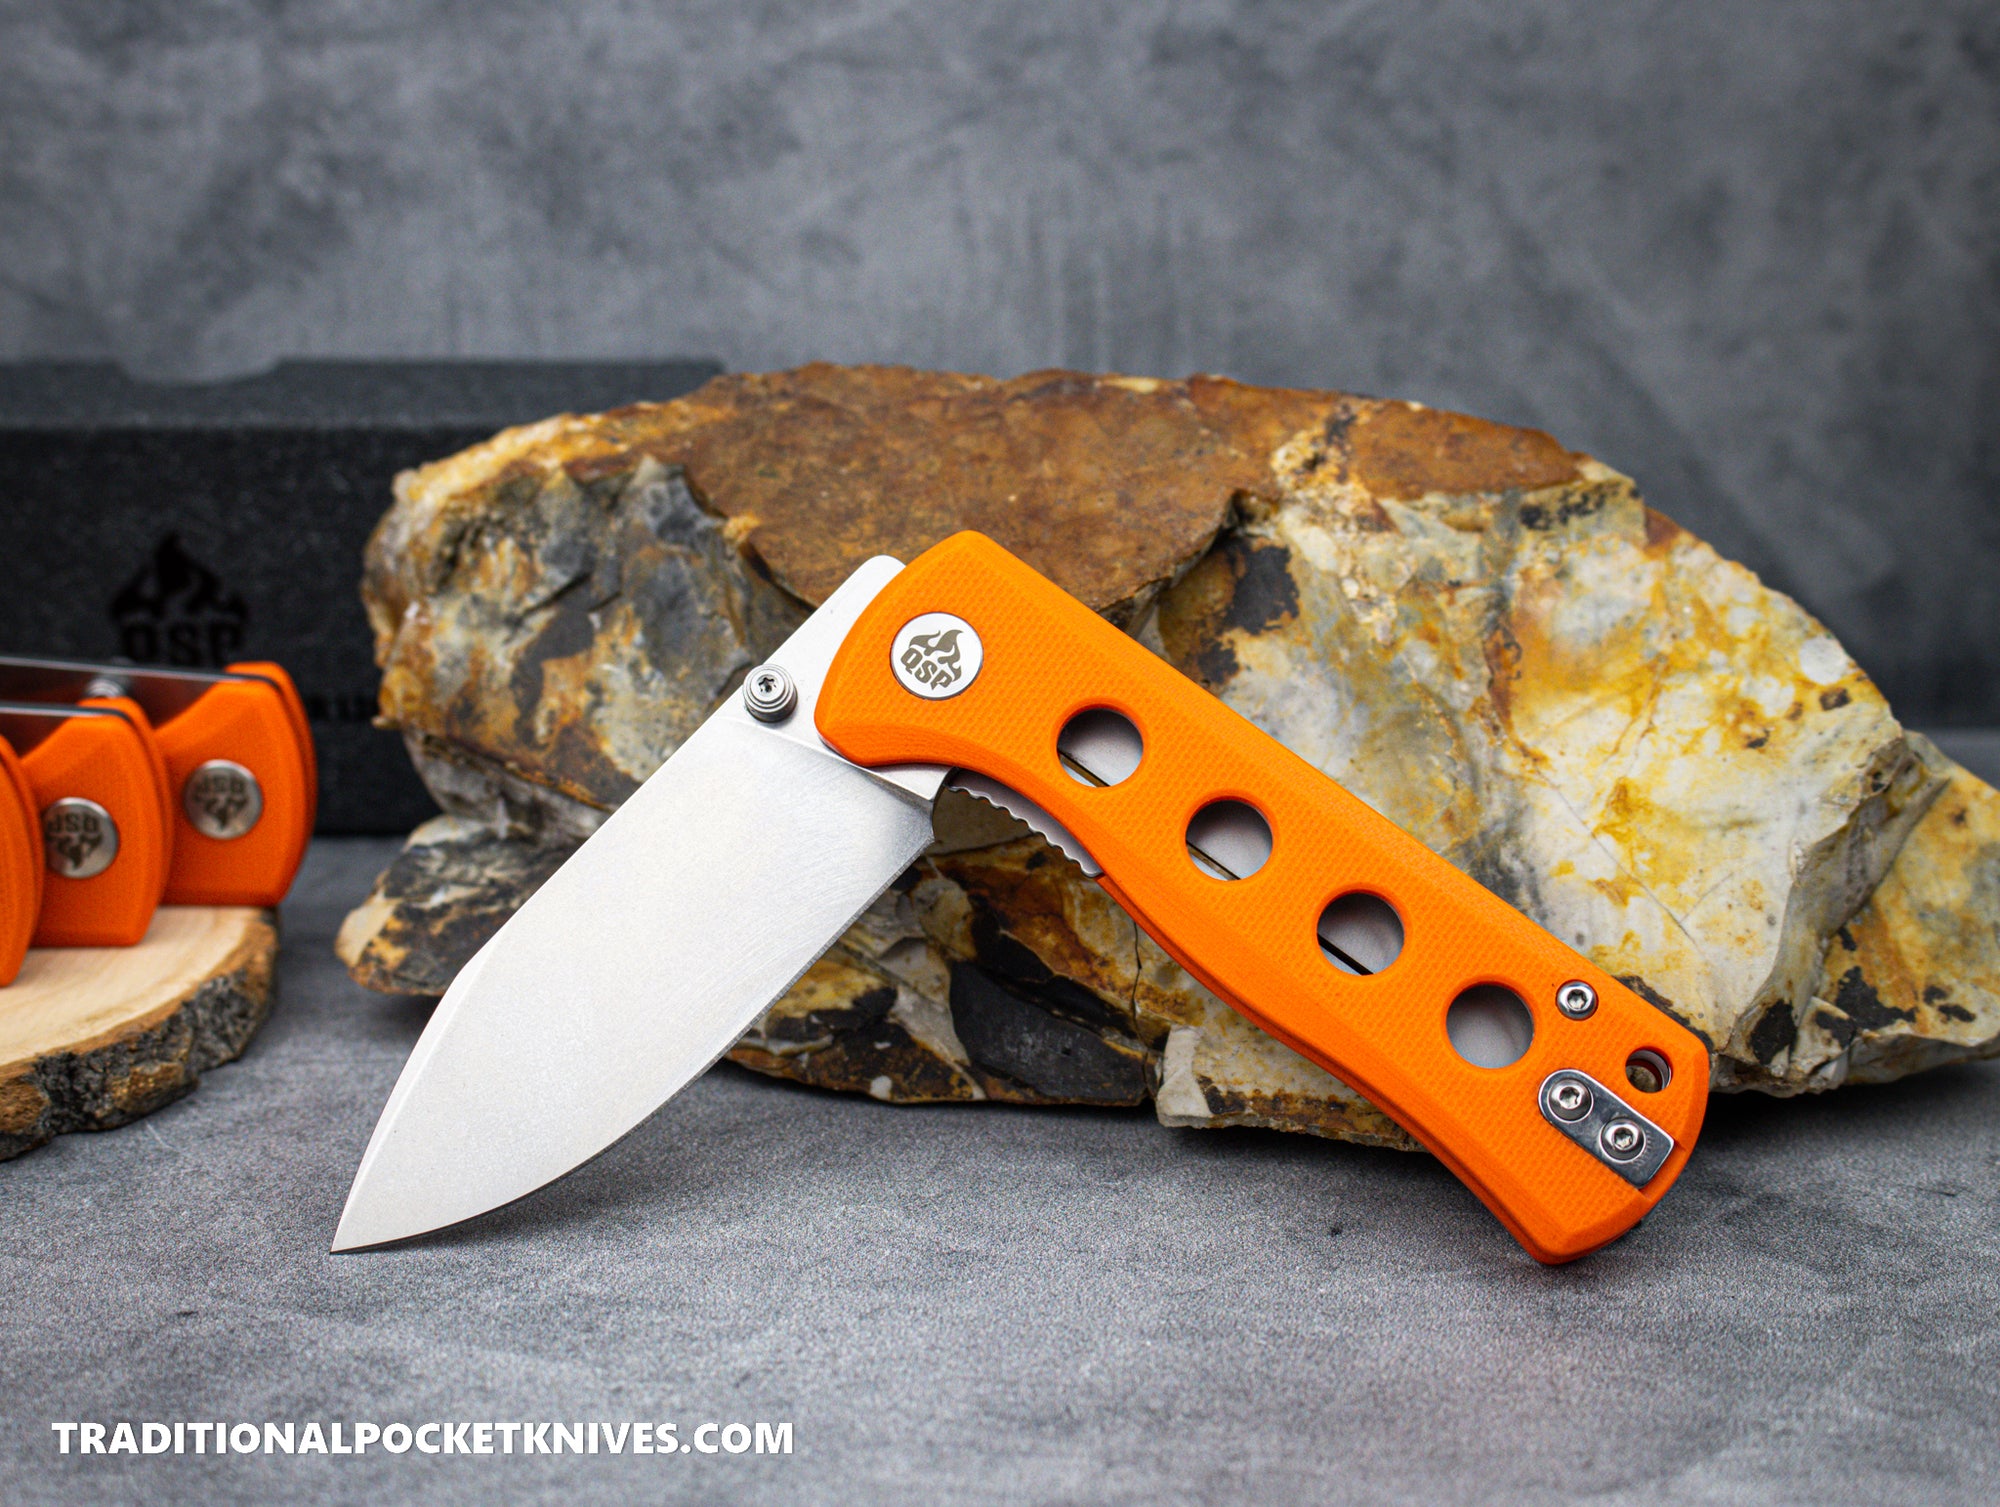 Cutco Cutlery - Calling all nature-lovers, backpackers, etc.! ⛰️ Need to  clear brush, shred wood for a fire 🔥 or cut paracord? When outdoors, the  CUTCO®/KA-BAR® Outdoorsman is the knife to carry.